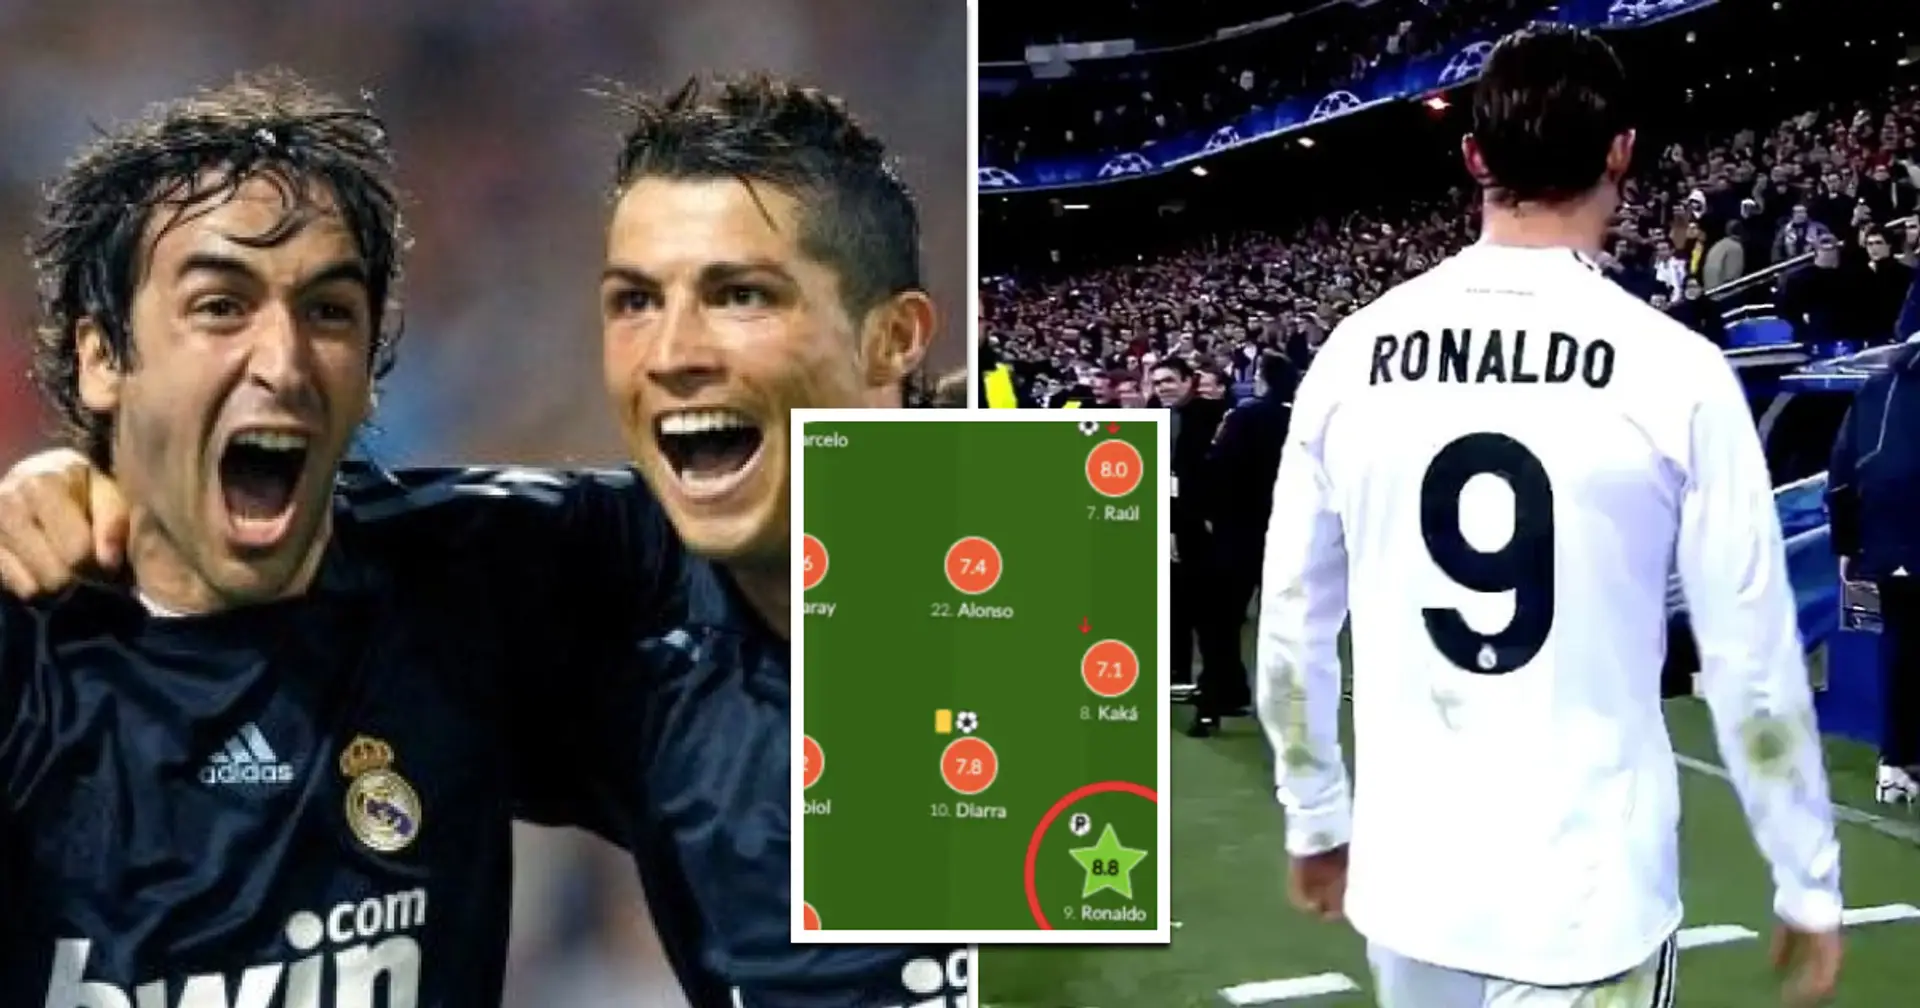 Recalling what Cristiano Ronaldo did on his official Real Madrid debut